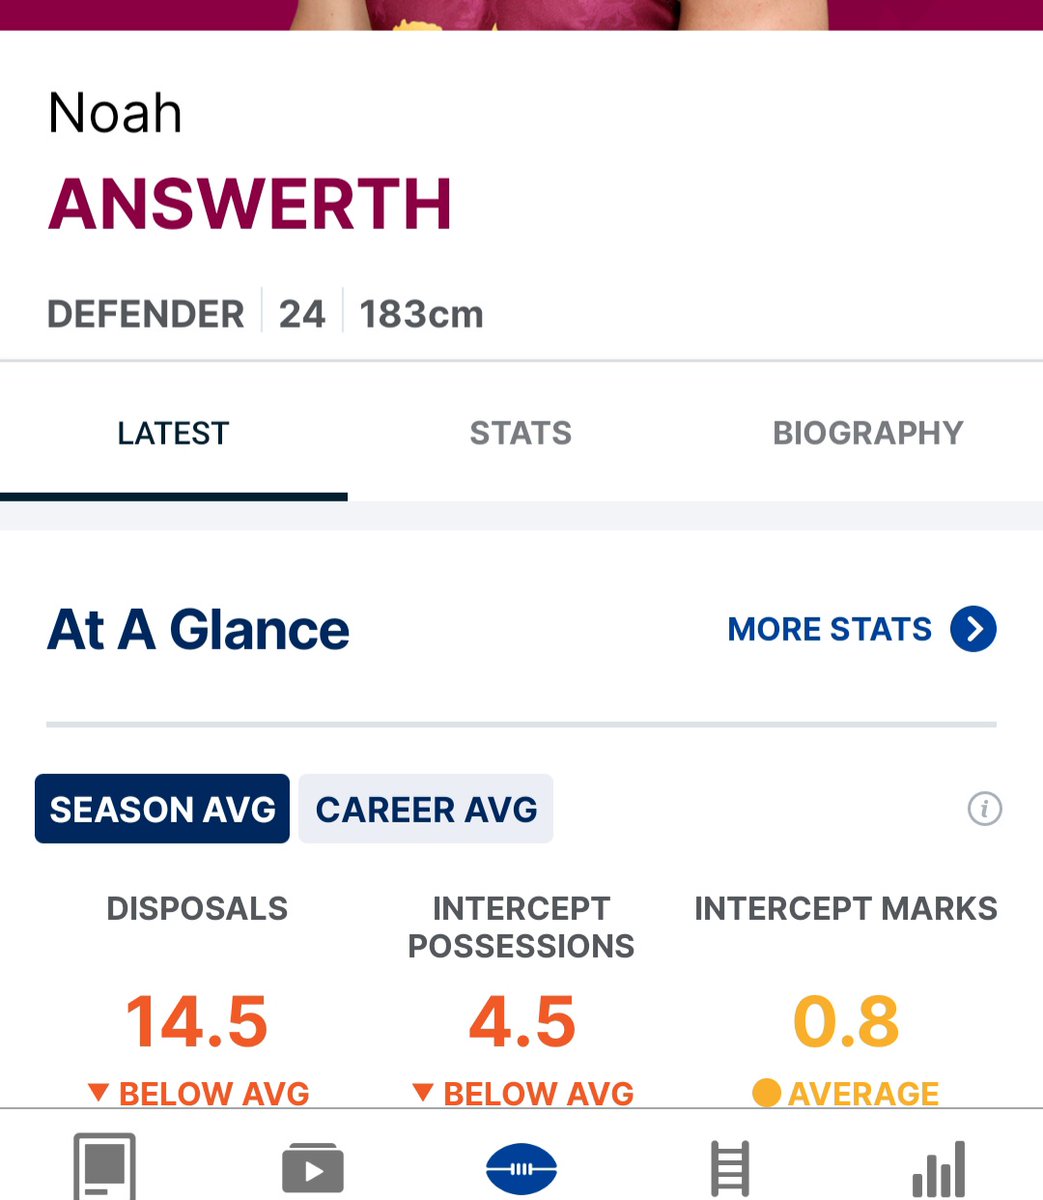 Looked up Noah Answerth's stats. Unsurprisingly he is below average in most categories, including as a human being. #AFLDeesLions